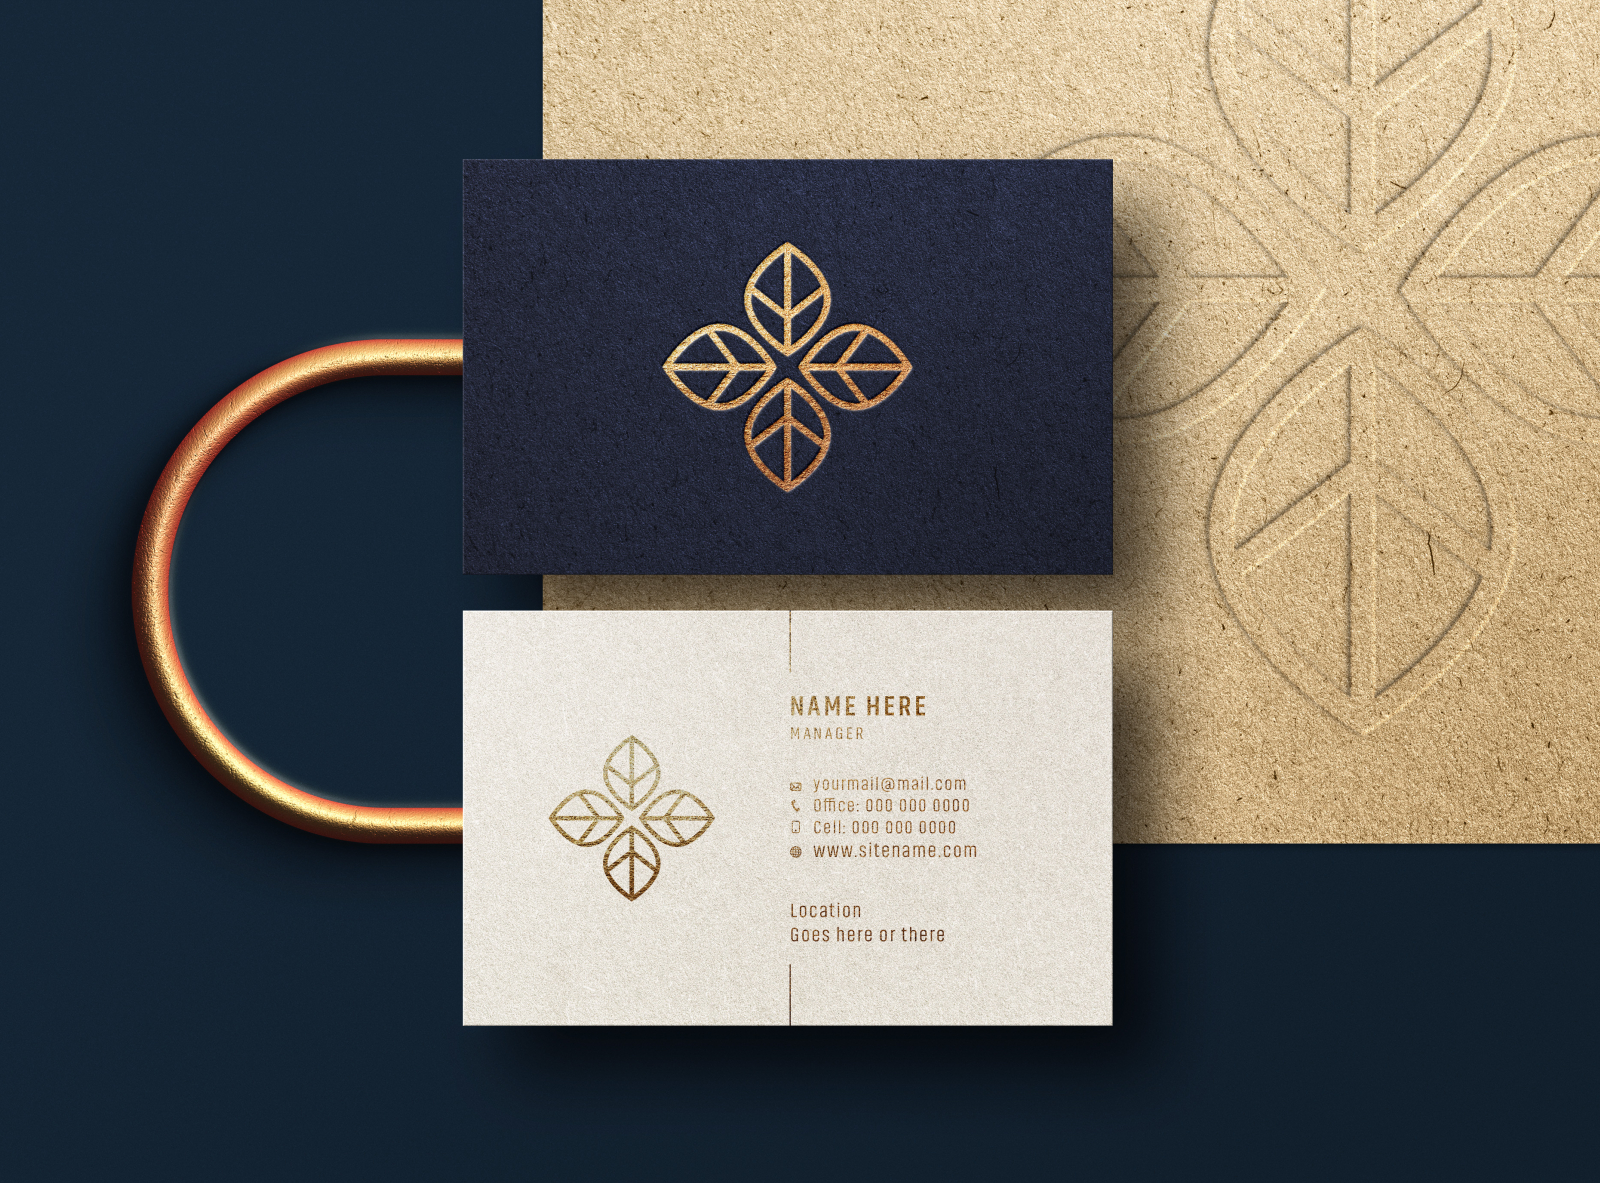 Download Modern & Luxury Business Card Mockup | Premium PSD by Mithun Mitra on Dribbble